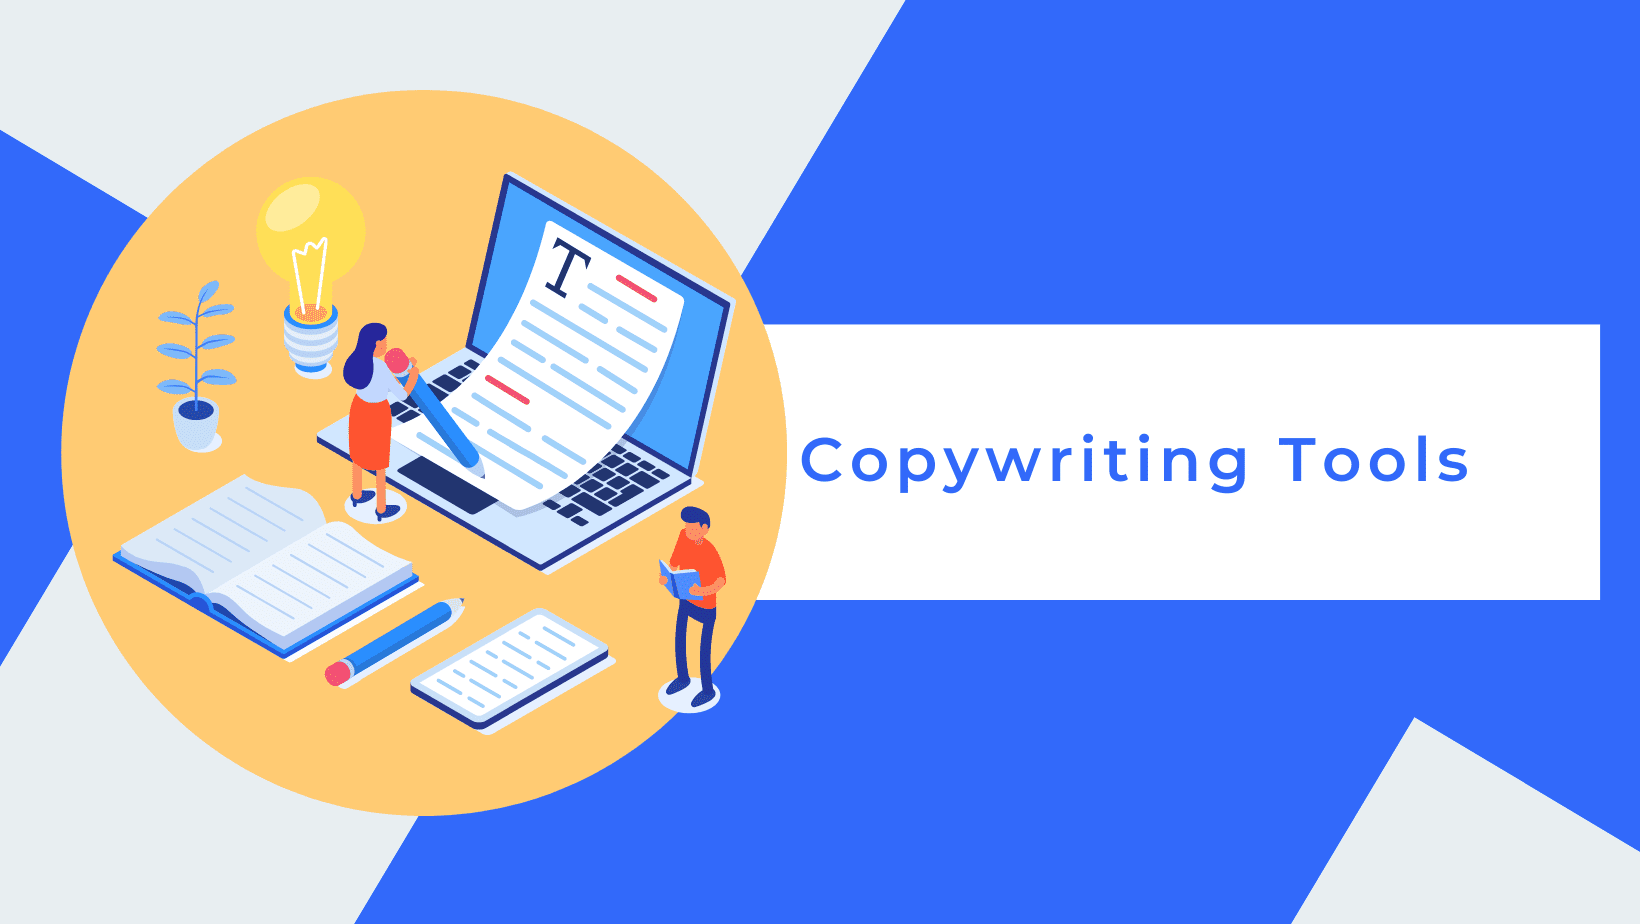 Marketers copywriting using tools that represent the copywriting tools